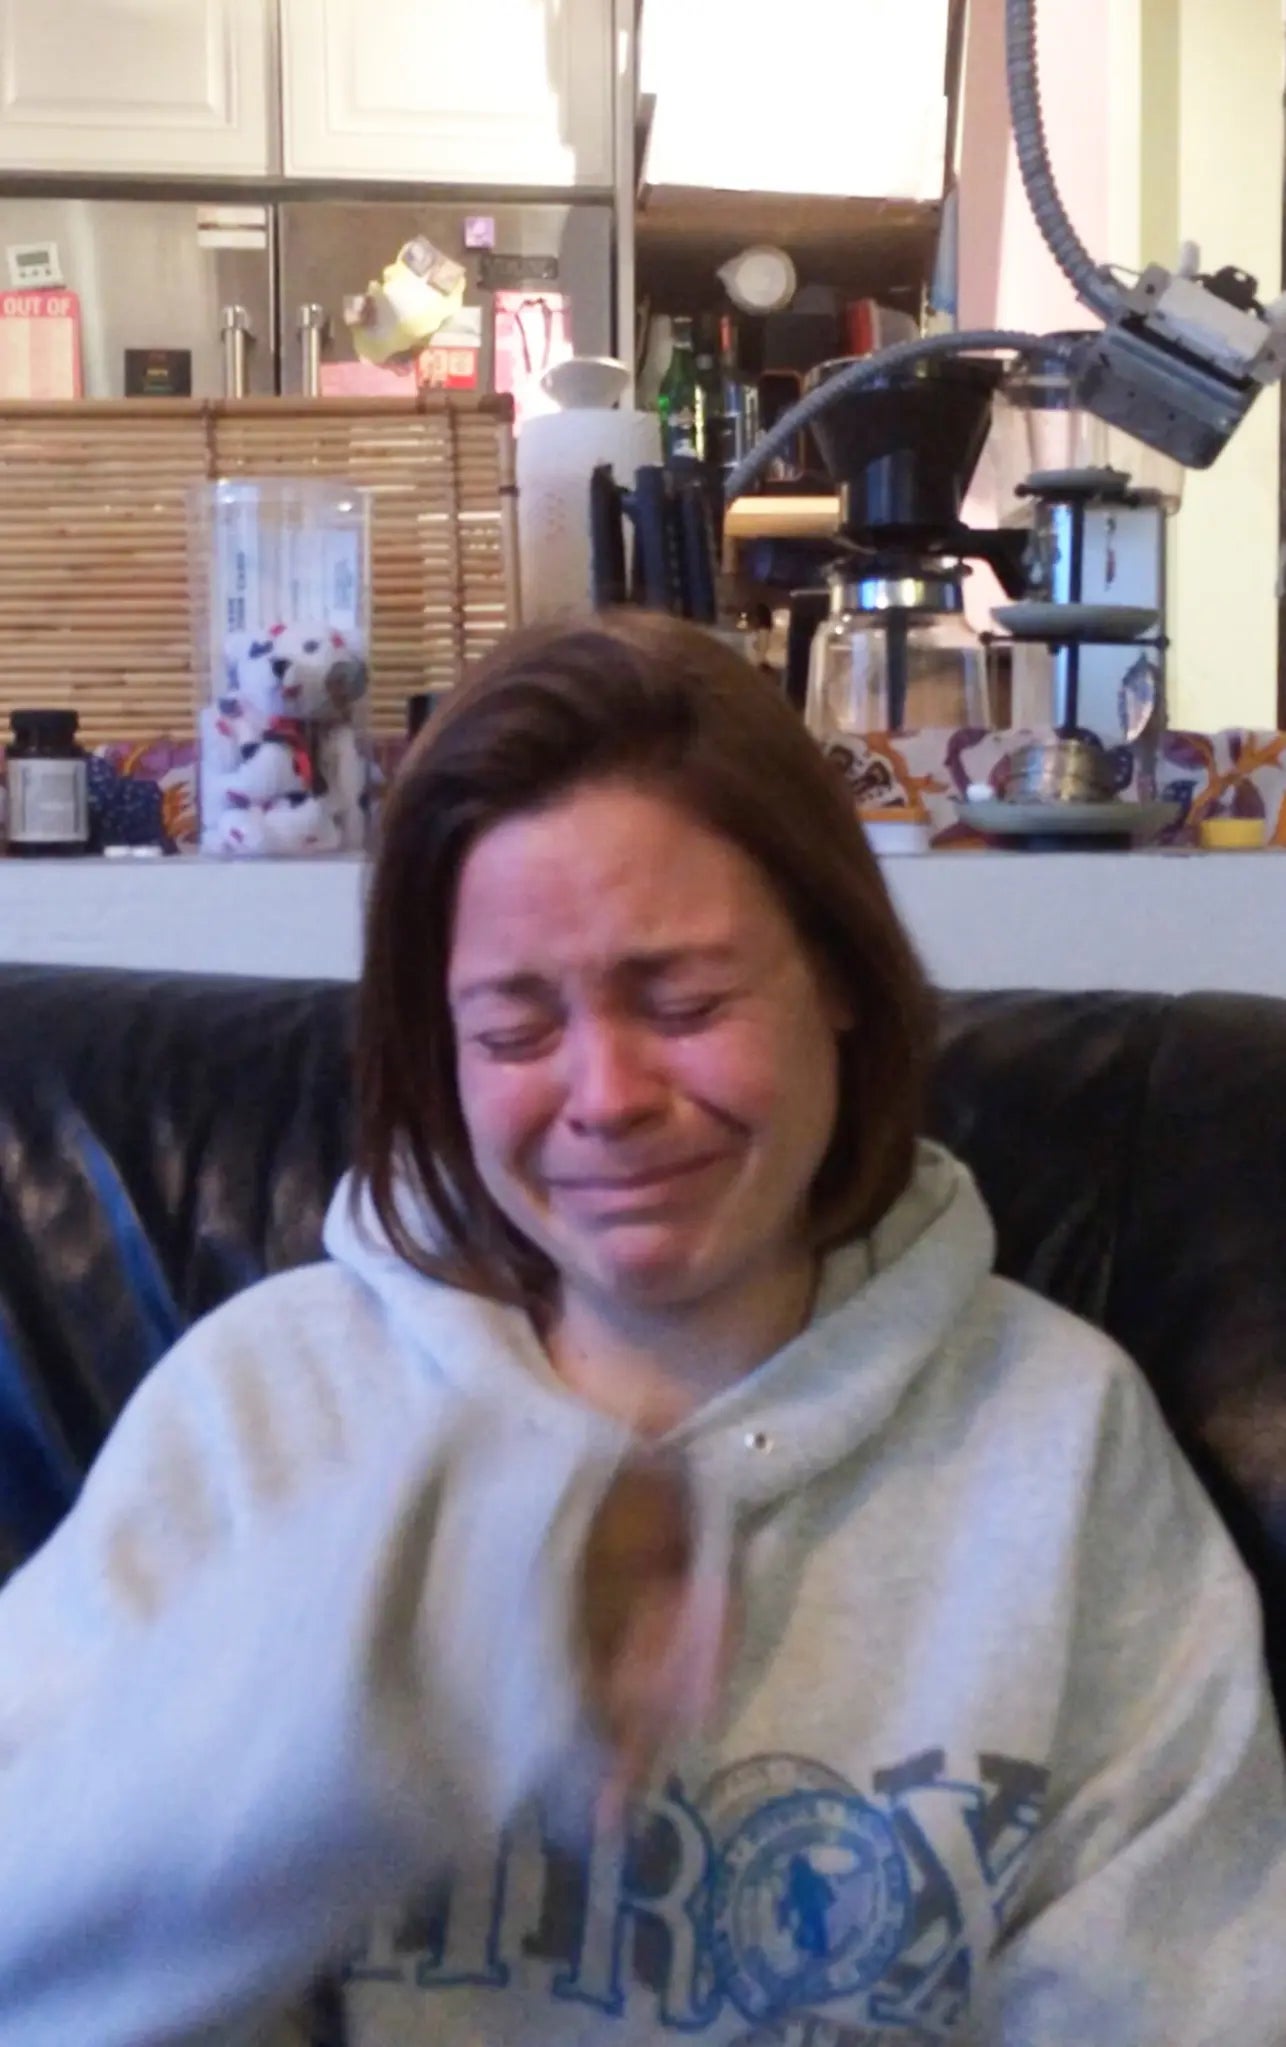 Claudia Drury, who Ray allegedly forced into being a sex worker and exploited for millions, is pictured in a sweatshirt crying.